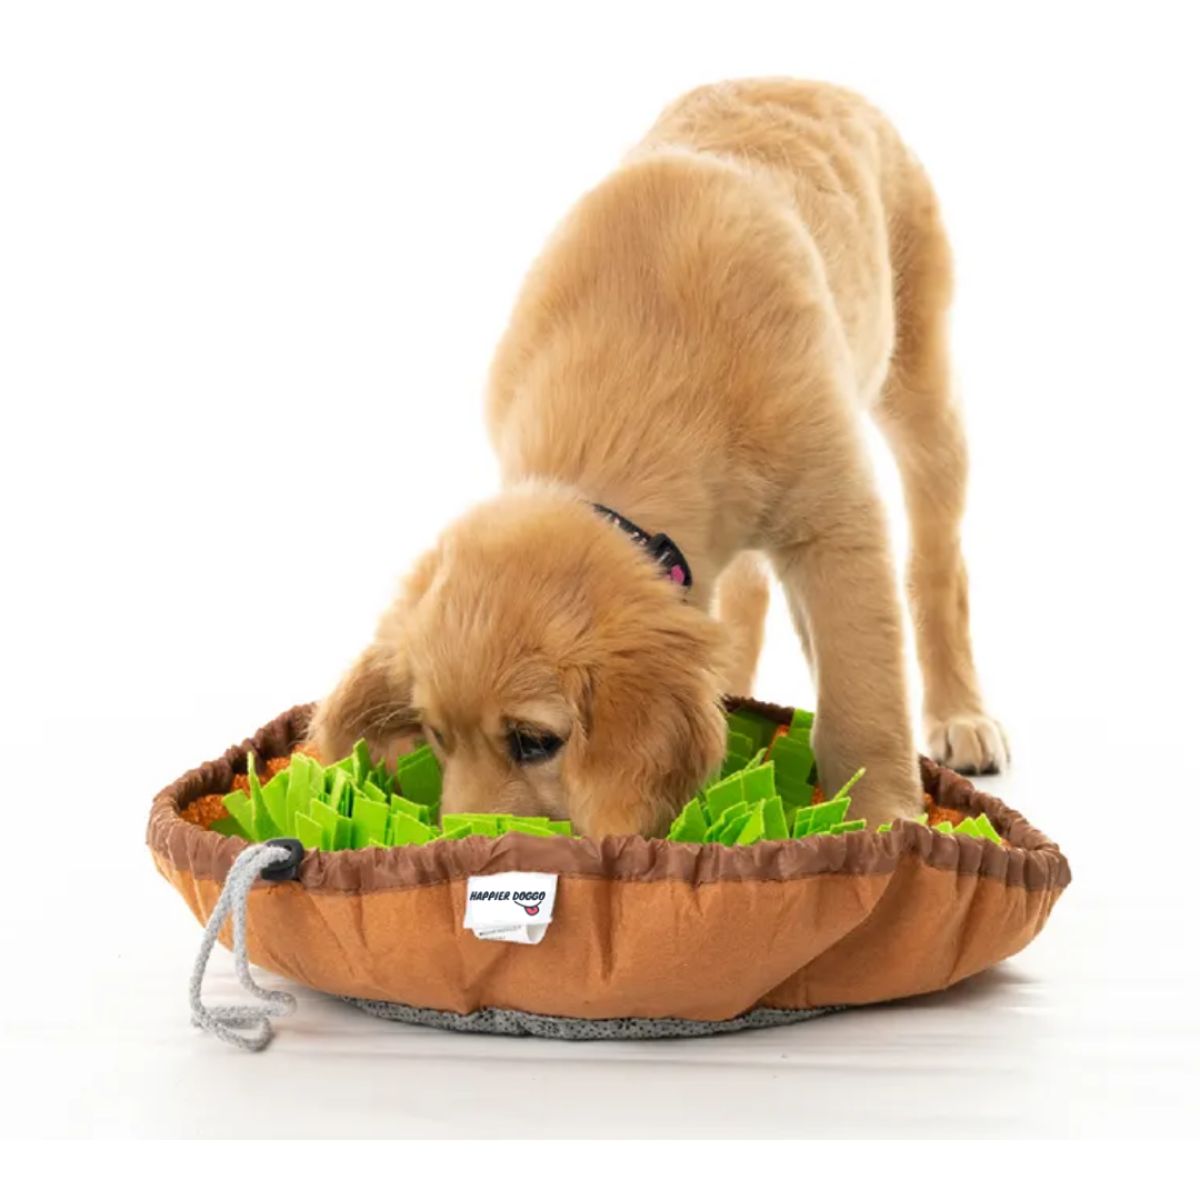 Dog finding treats in snuffle mat for dogs Foofield